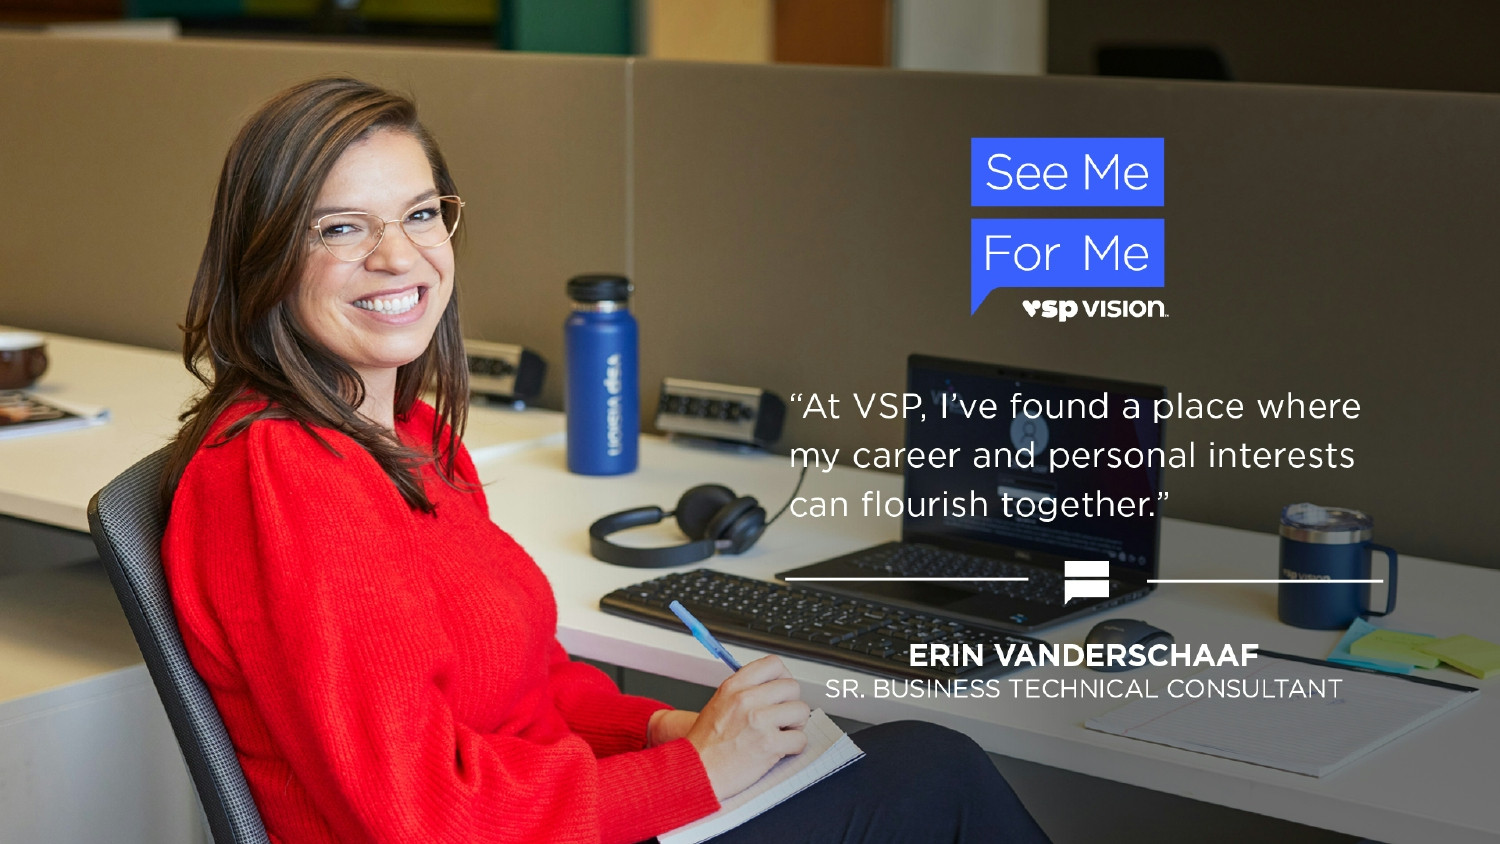 “See Me For Me” campaign highlights unique perspectives of colleagues.